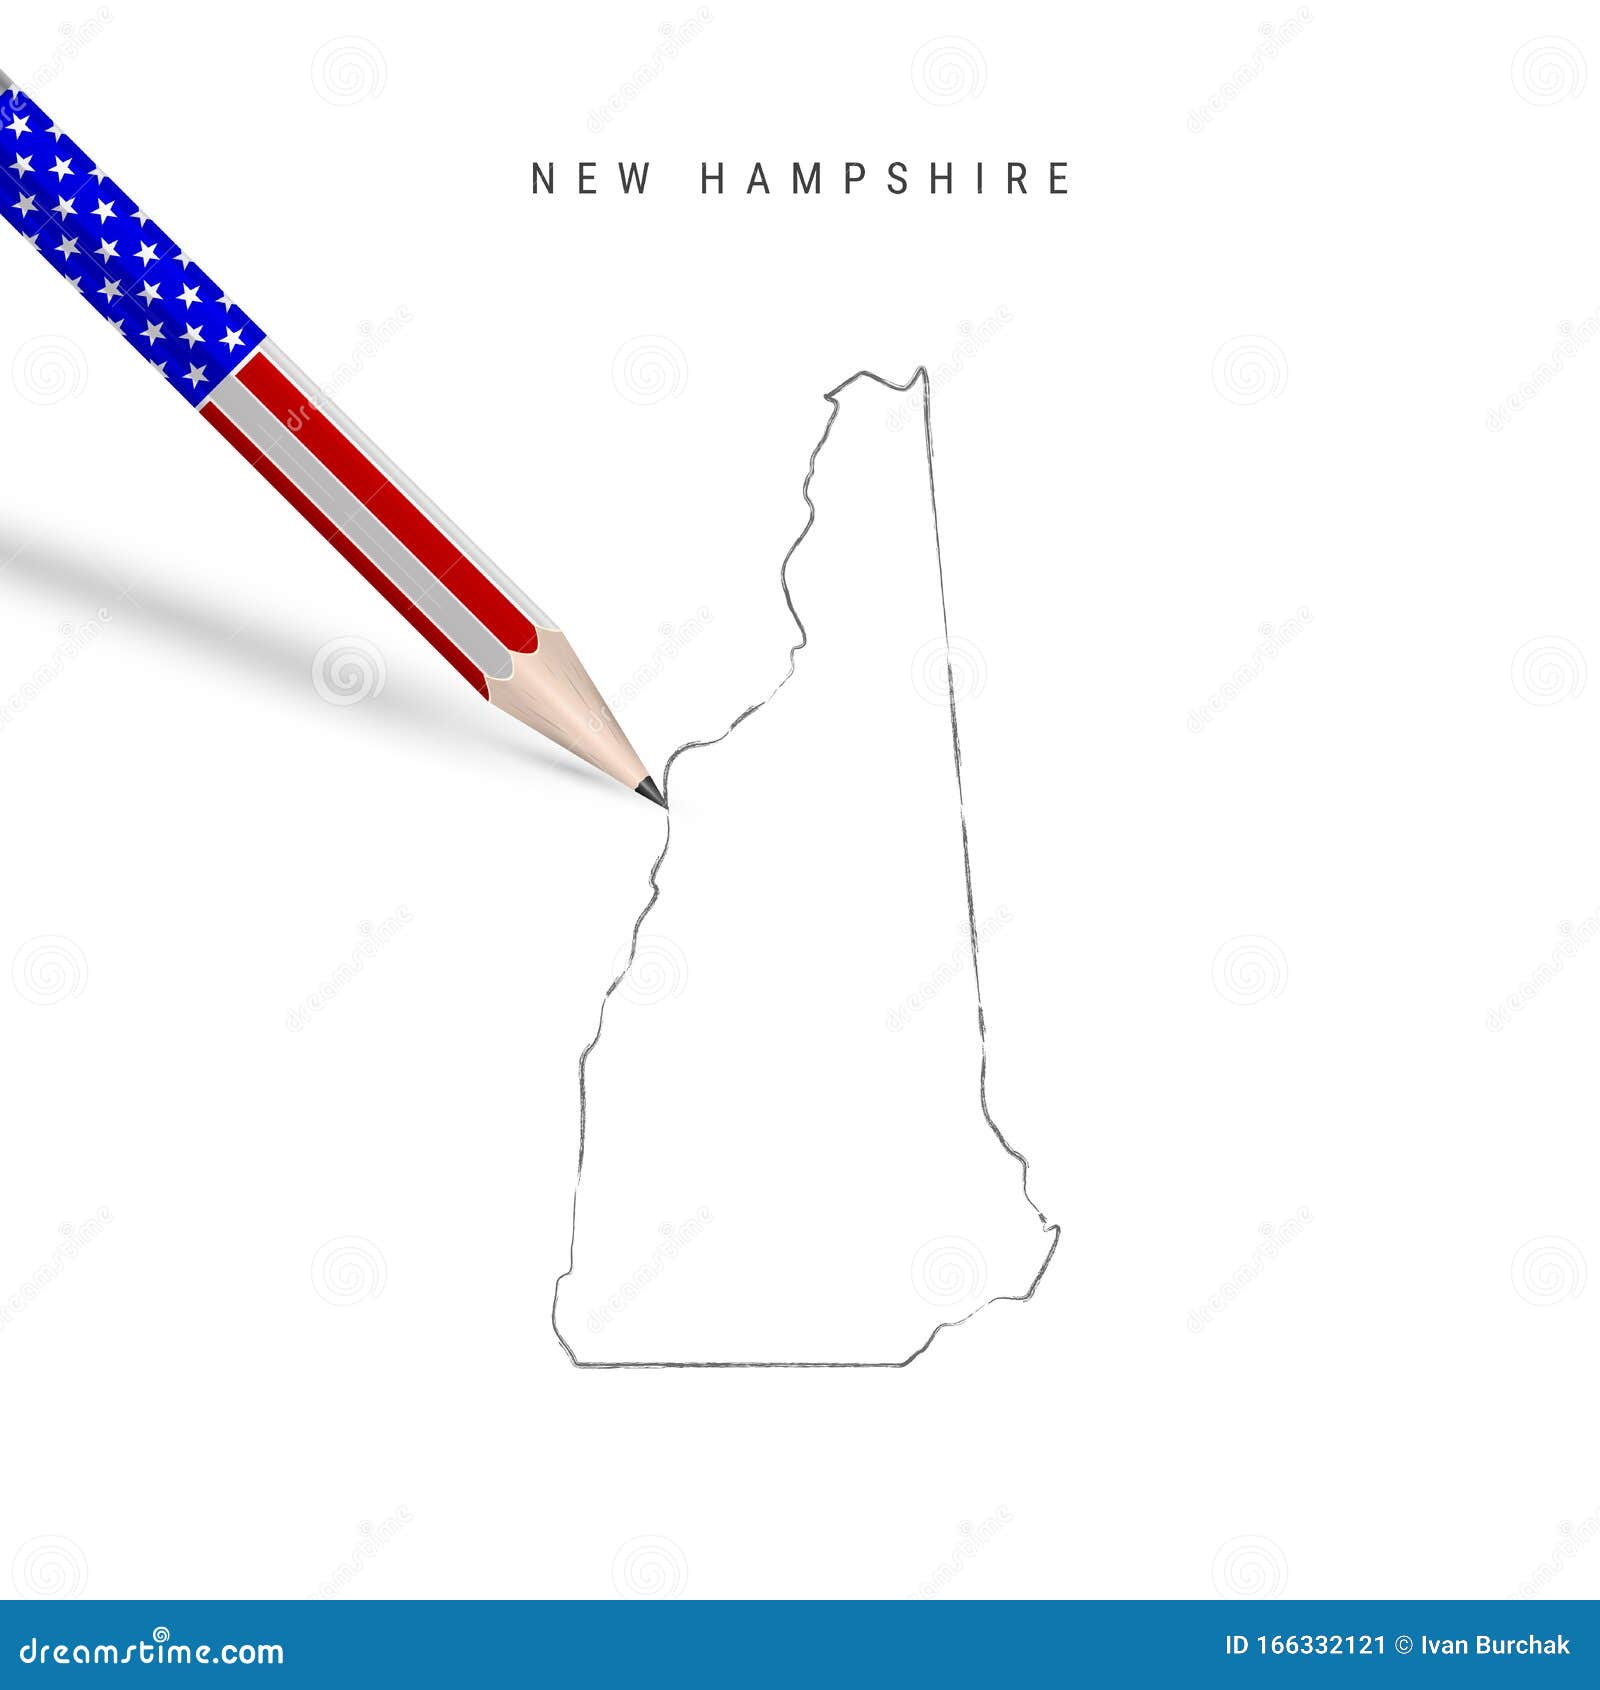 New Hampshire Us State Vector Map Pencil Sketch New Hampshire